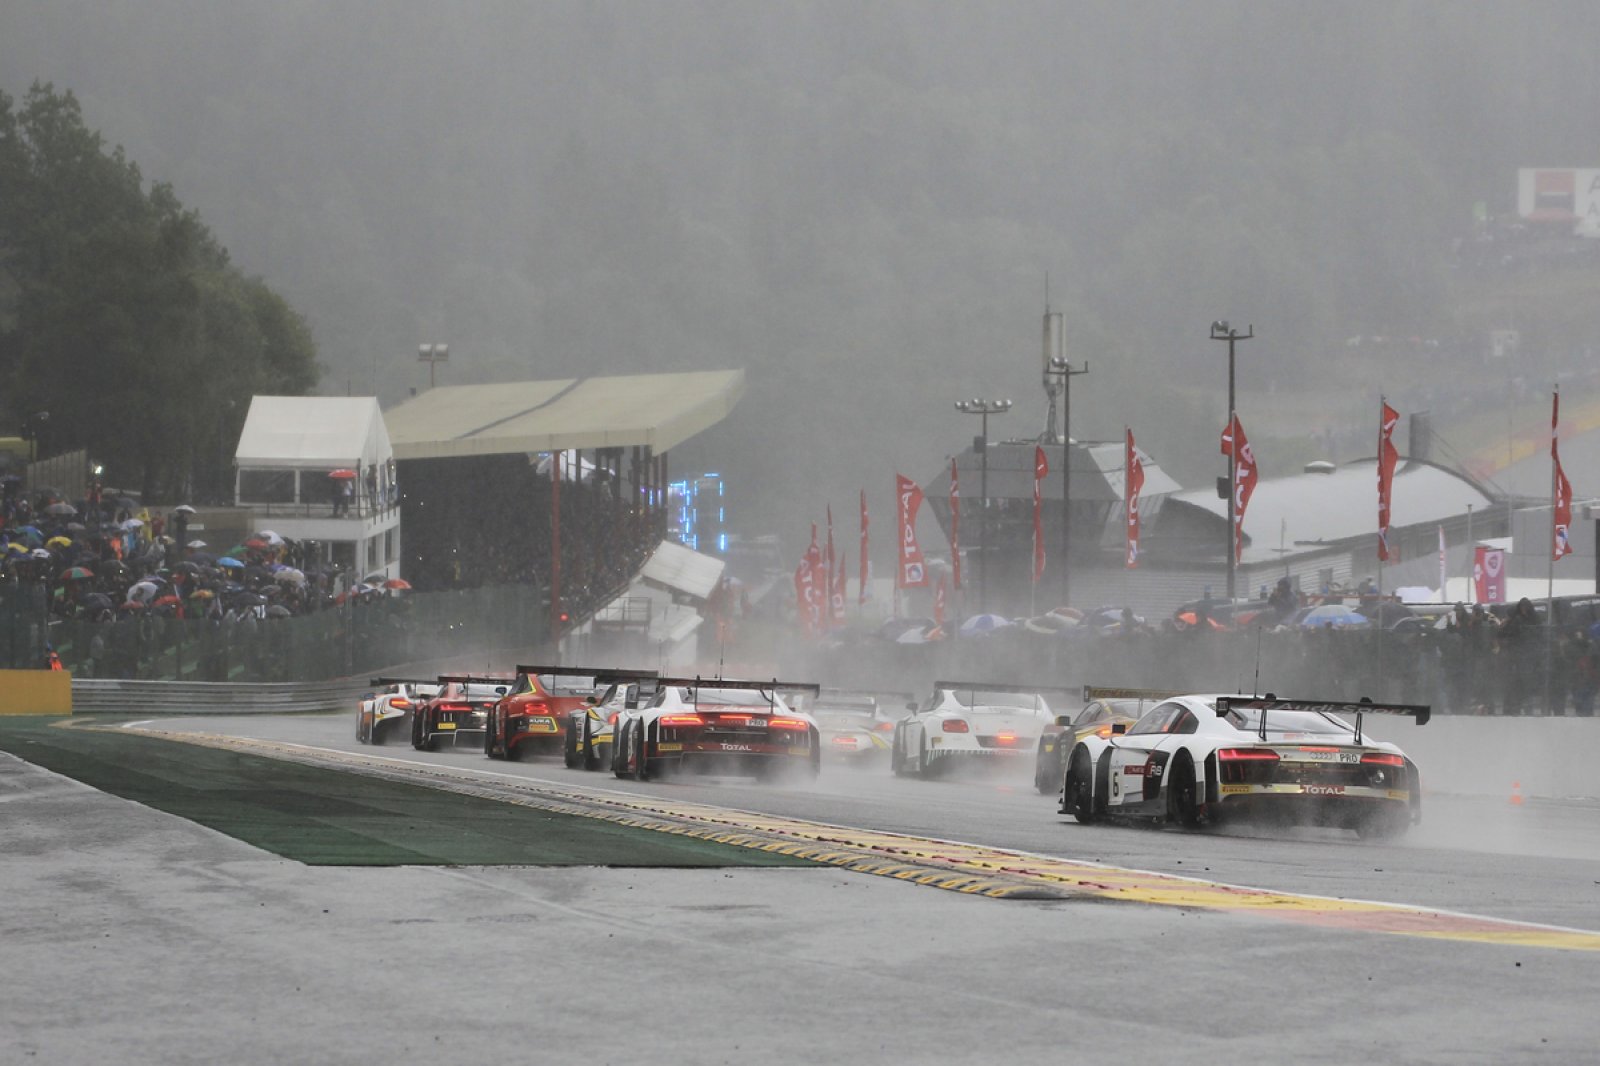 Facts and figures on the 2015 Total 24 Hours of Spa